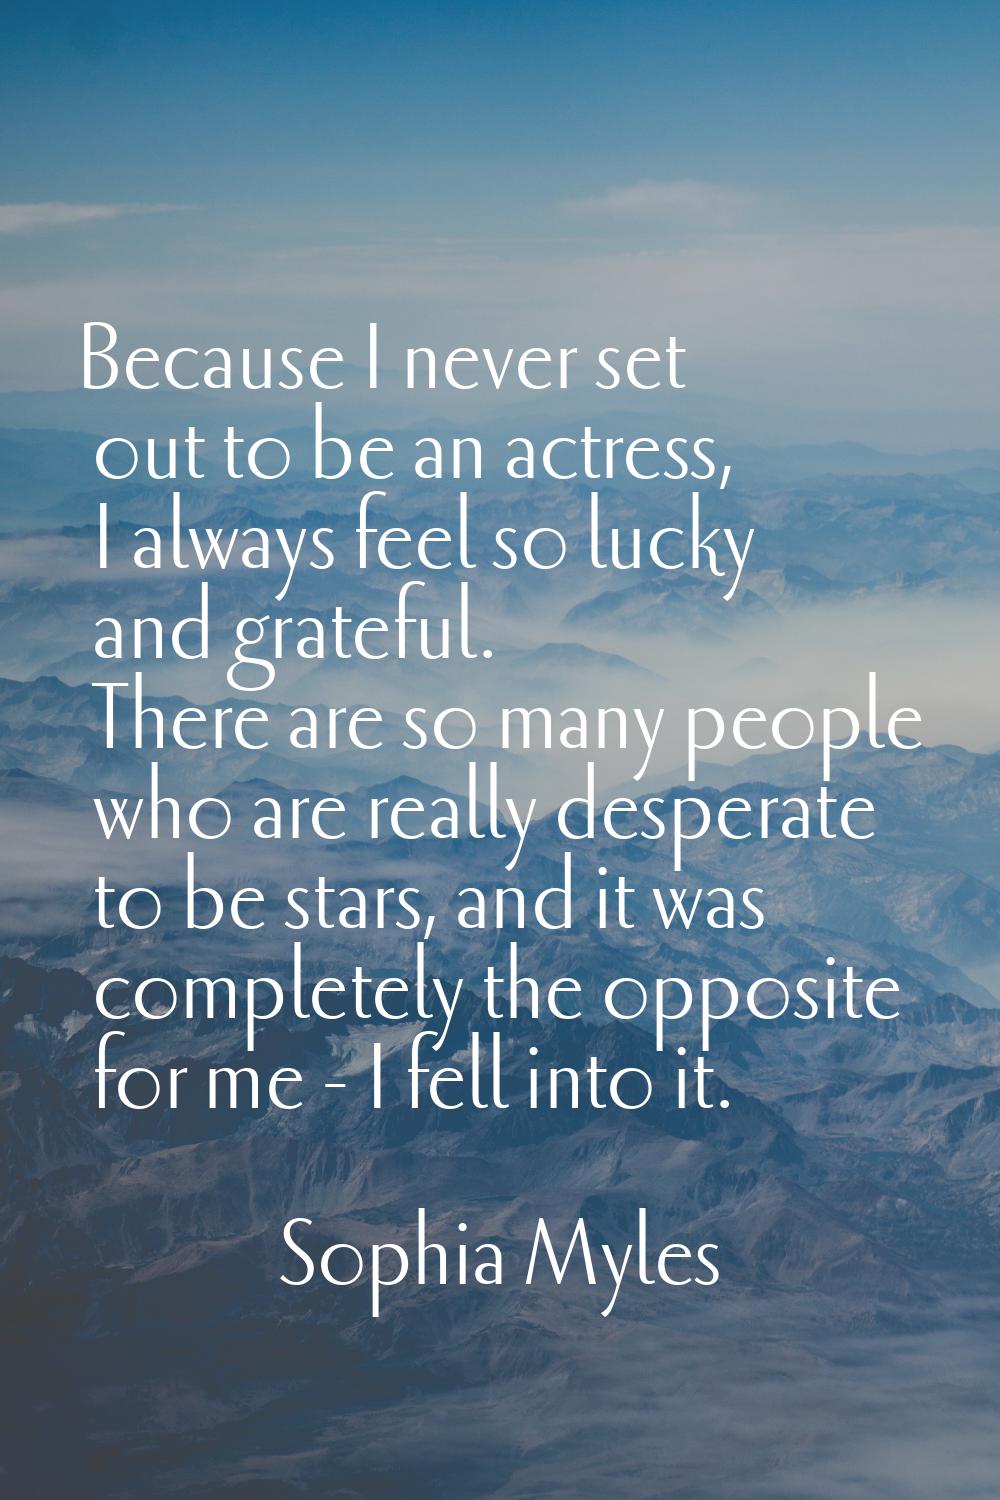 Because I never set out to be an actress, I always feel so lucky and grateful. There are so many pe